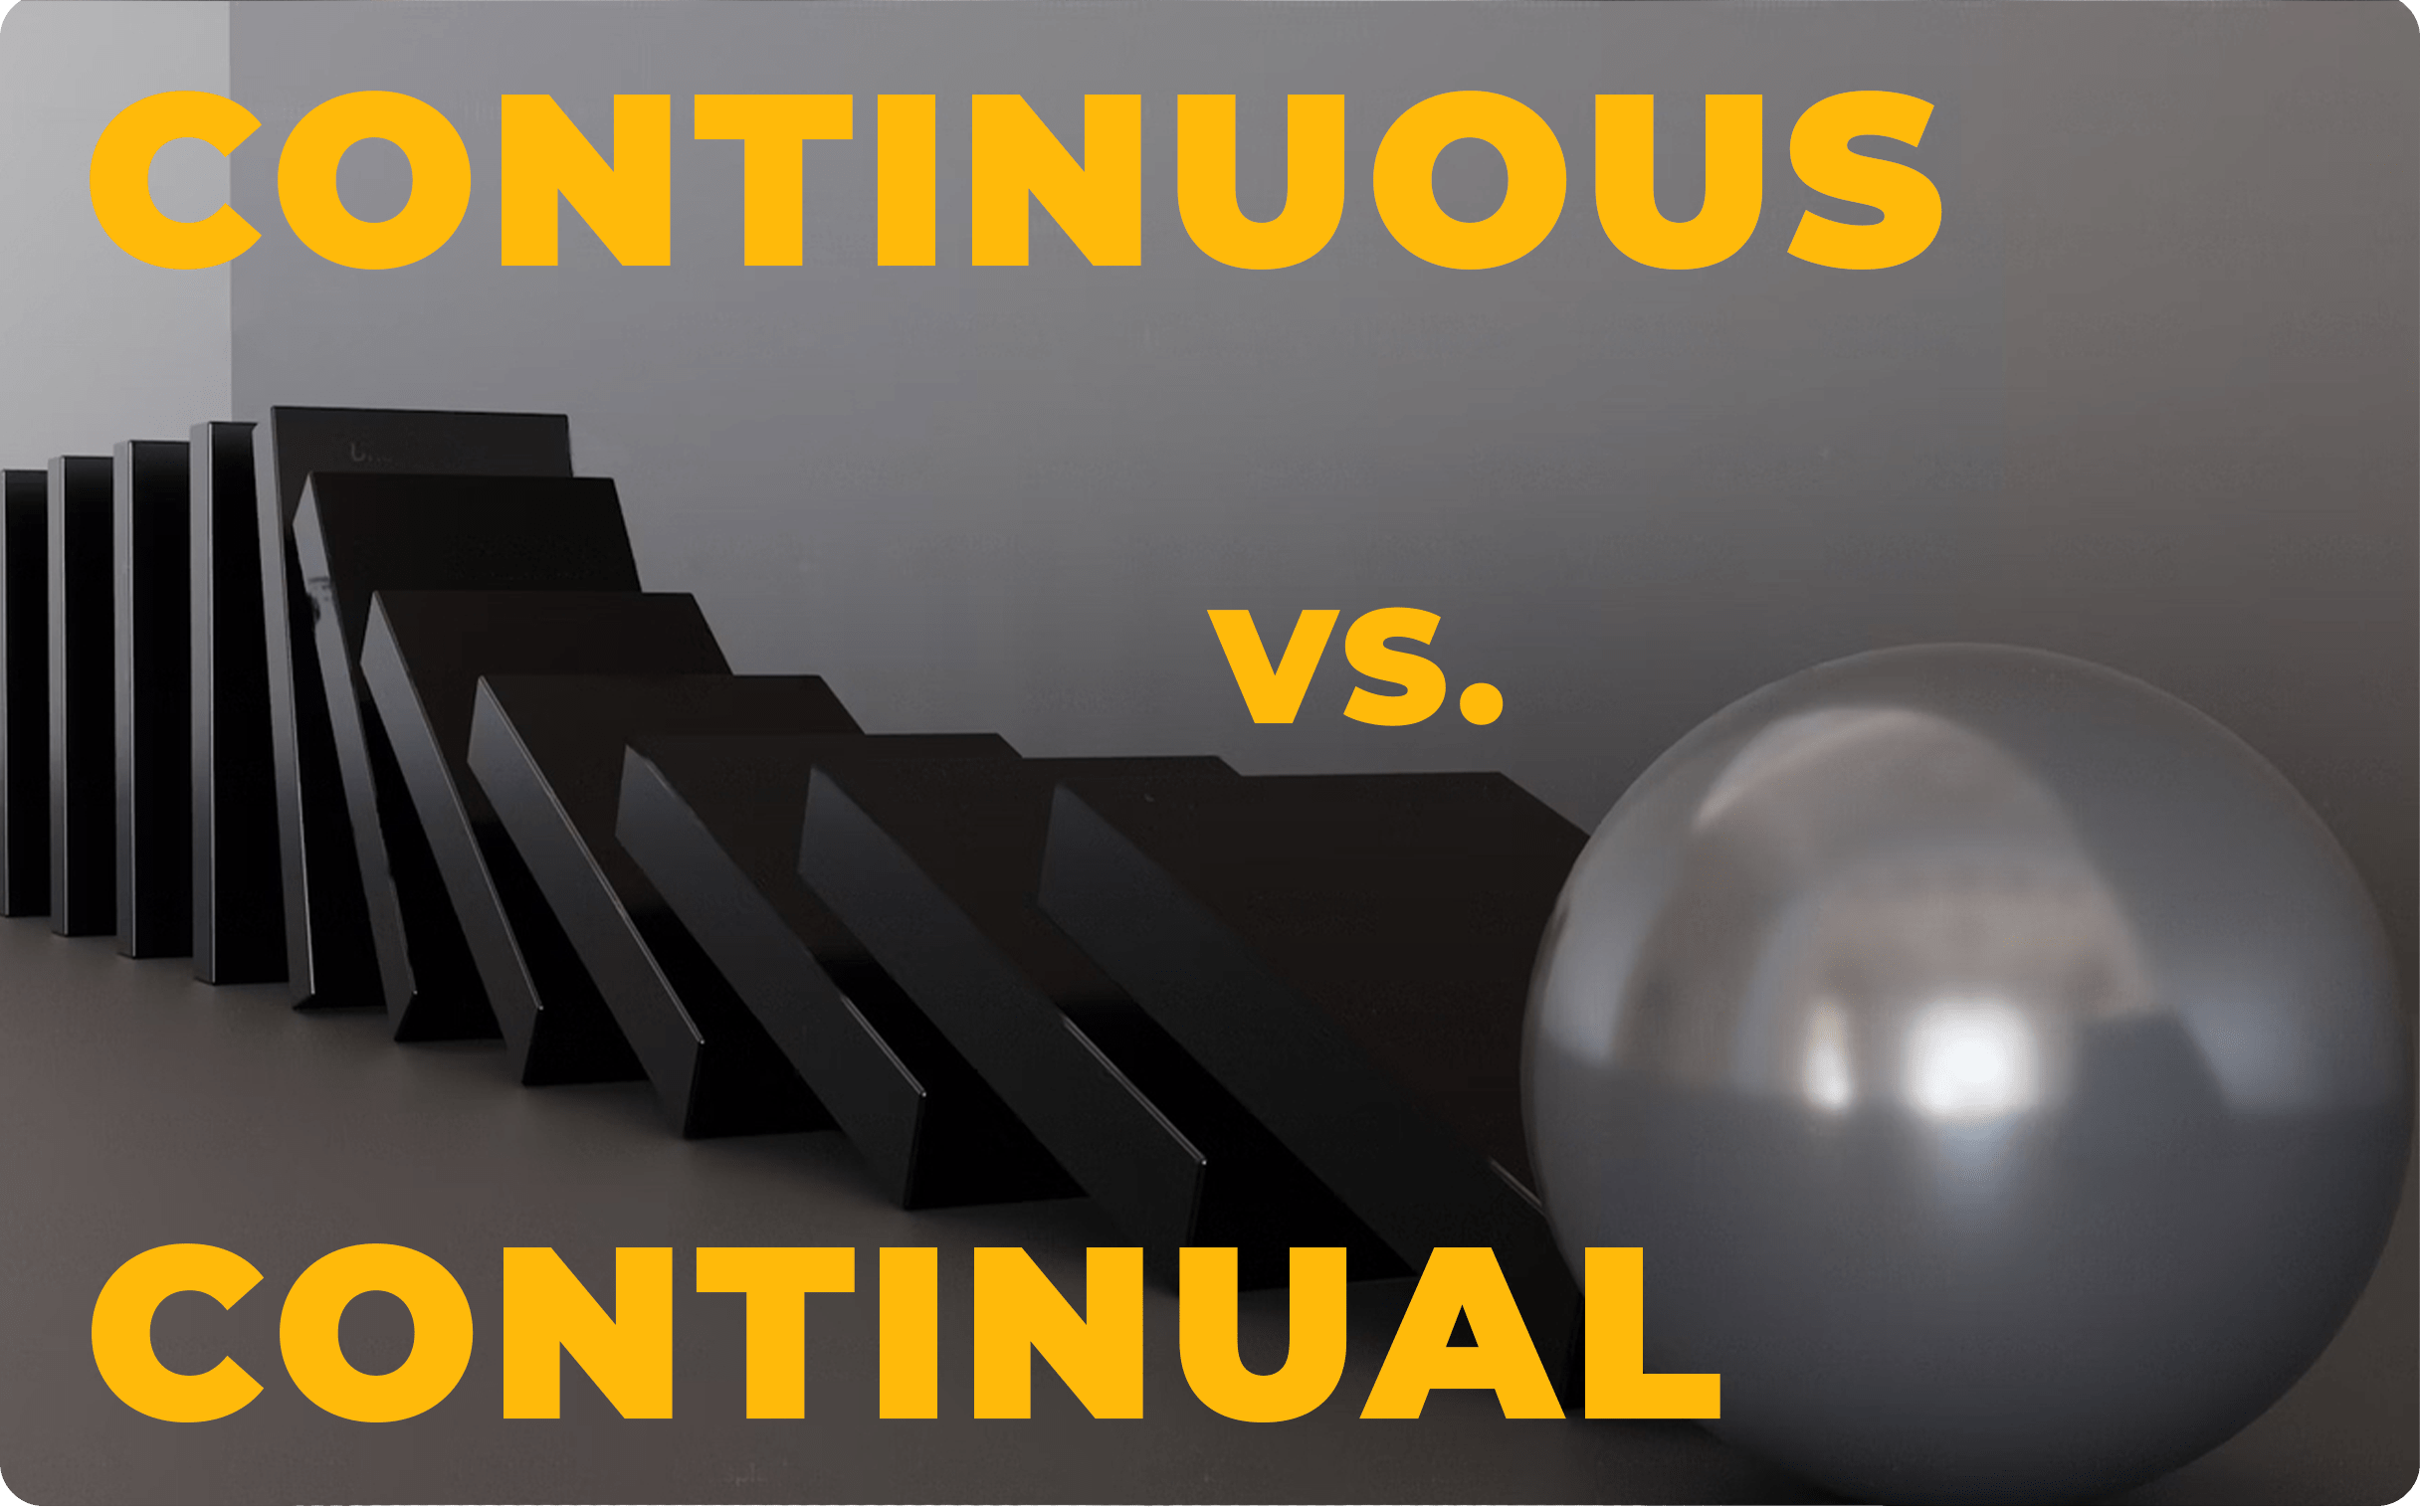 What’s the difference between "continual" and "continuous"?